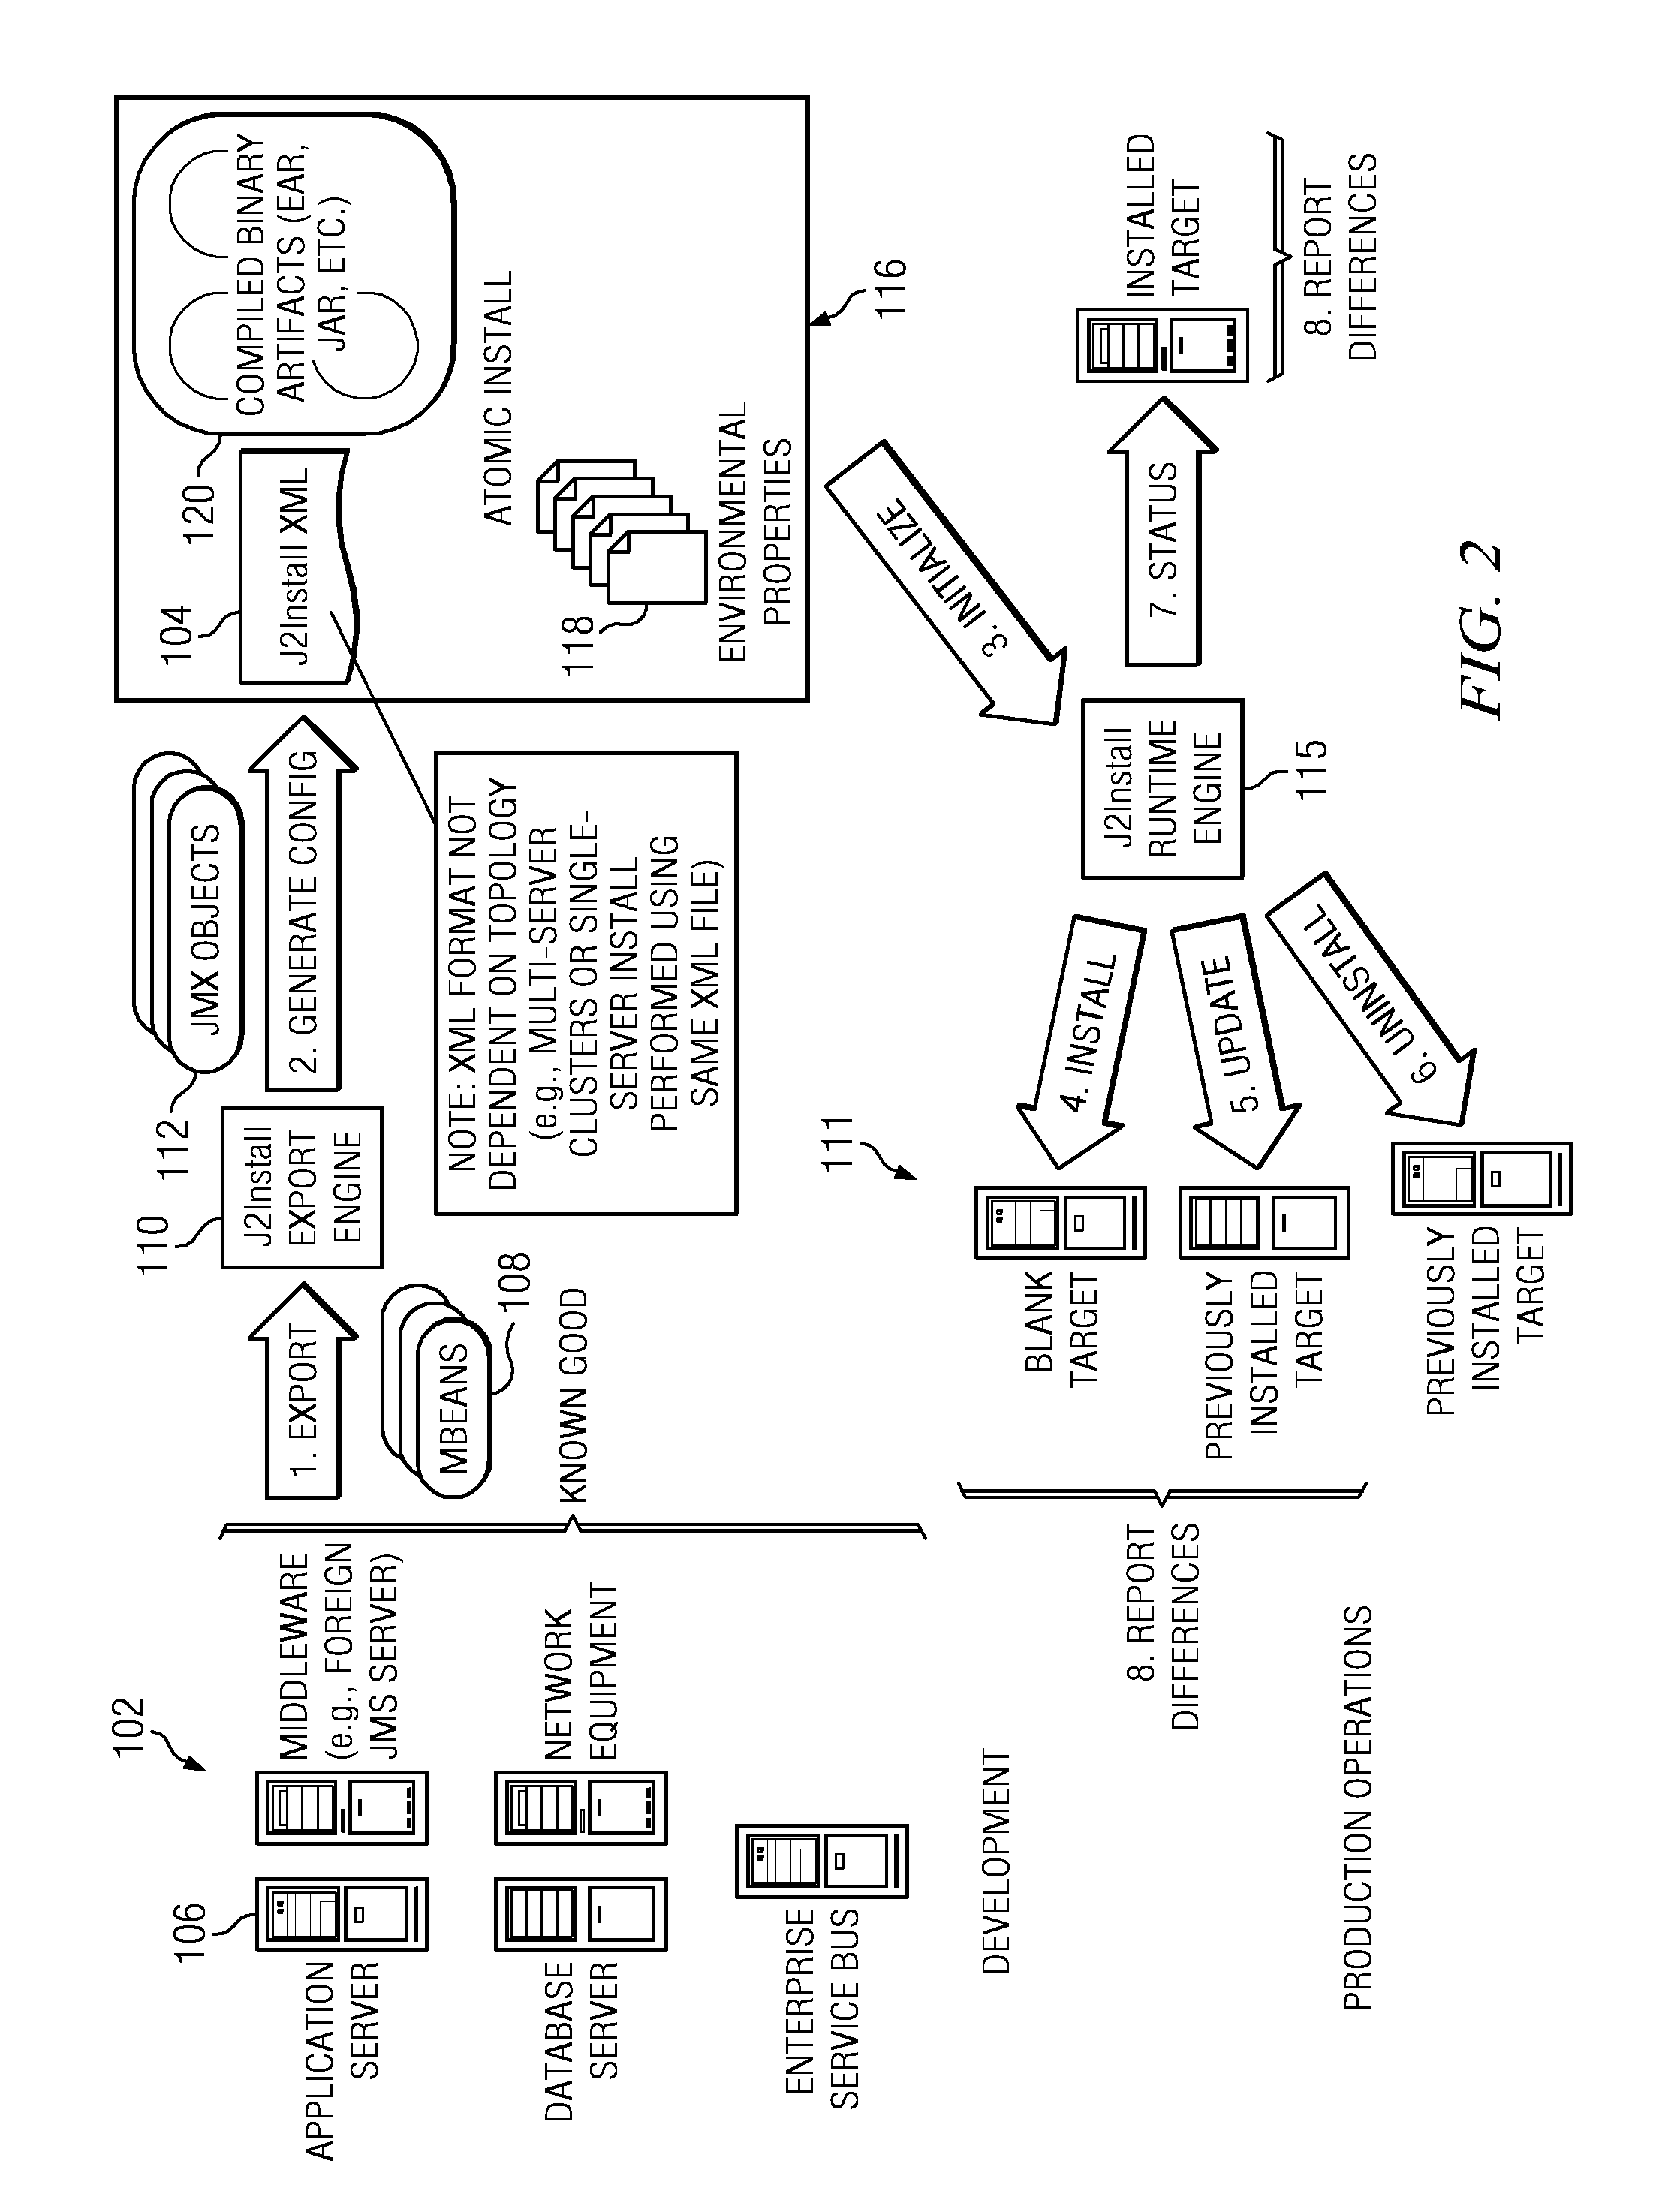 System and method for cloud provisioning and application deployment